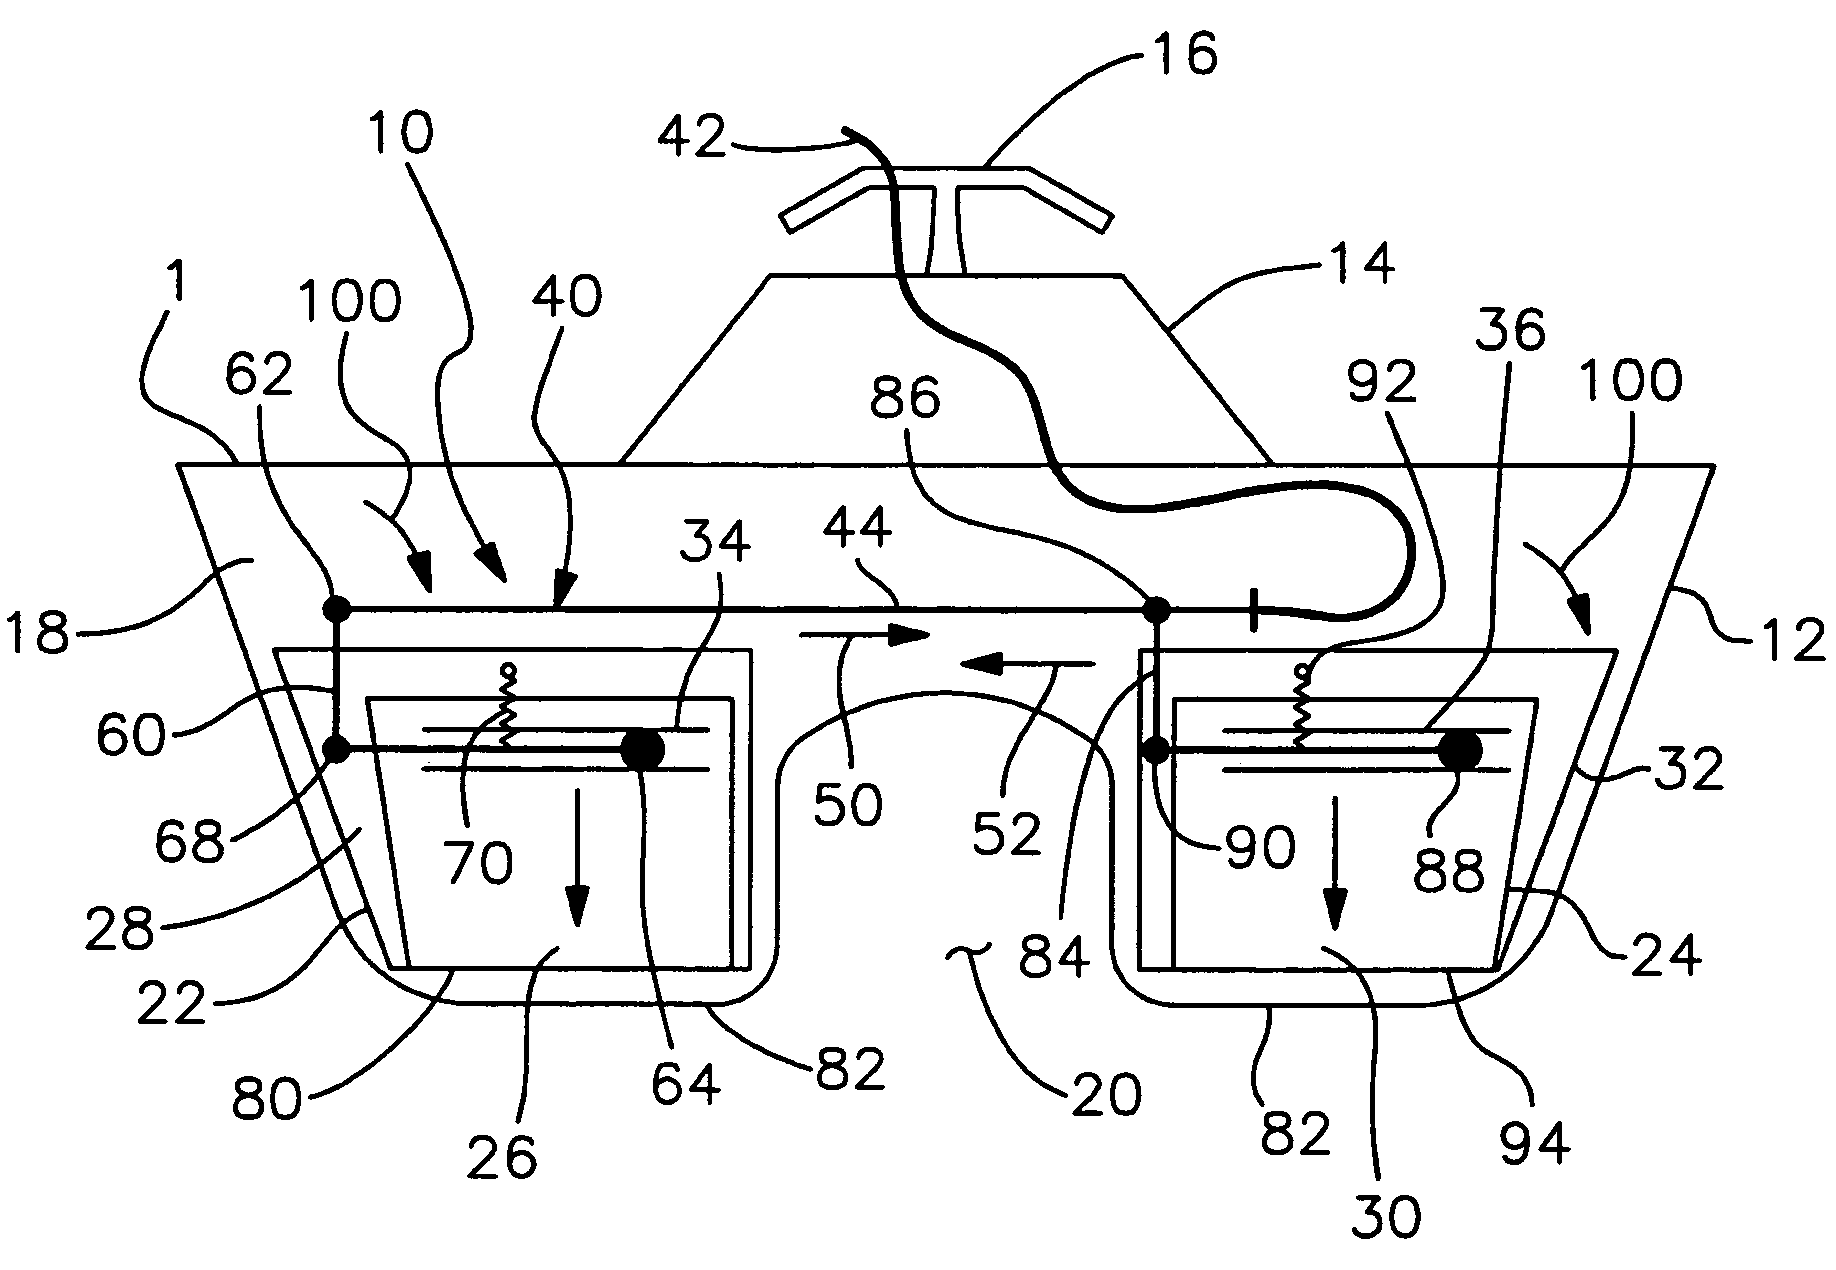 Braking system for a personal watercraft